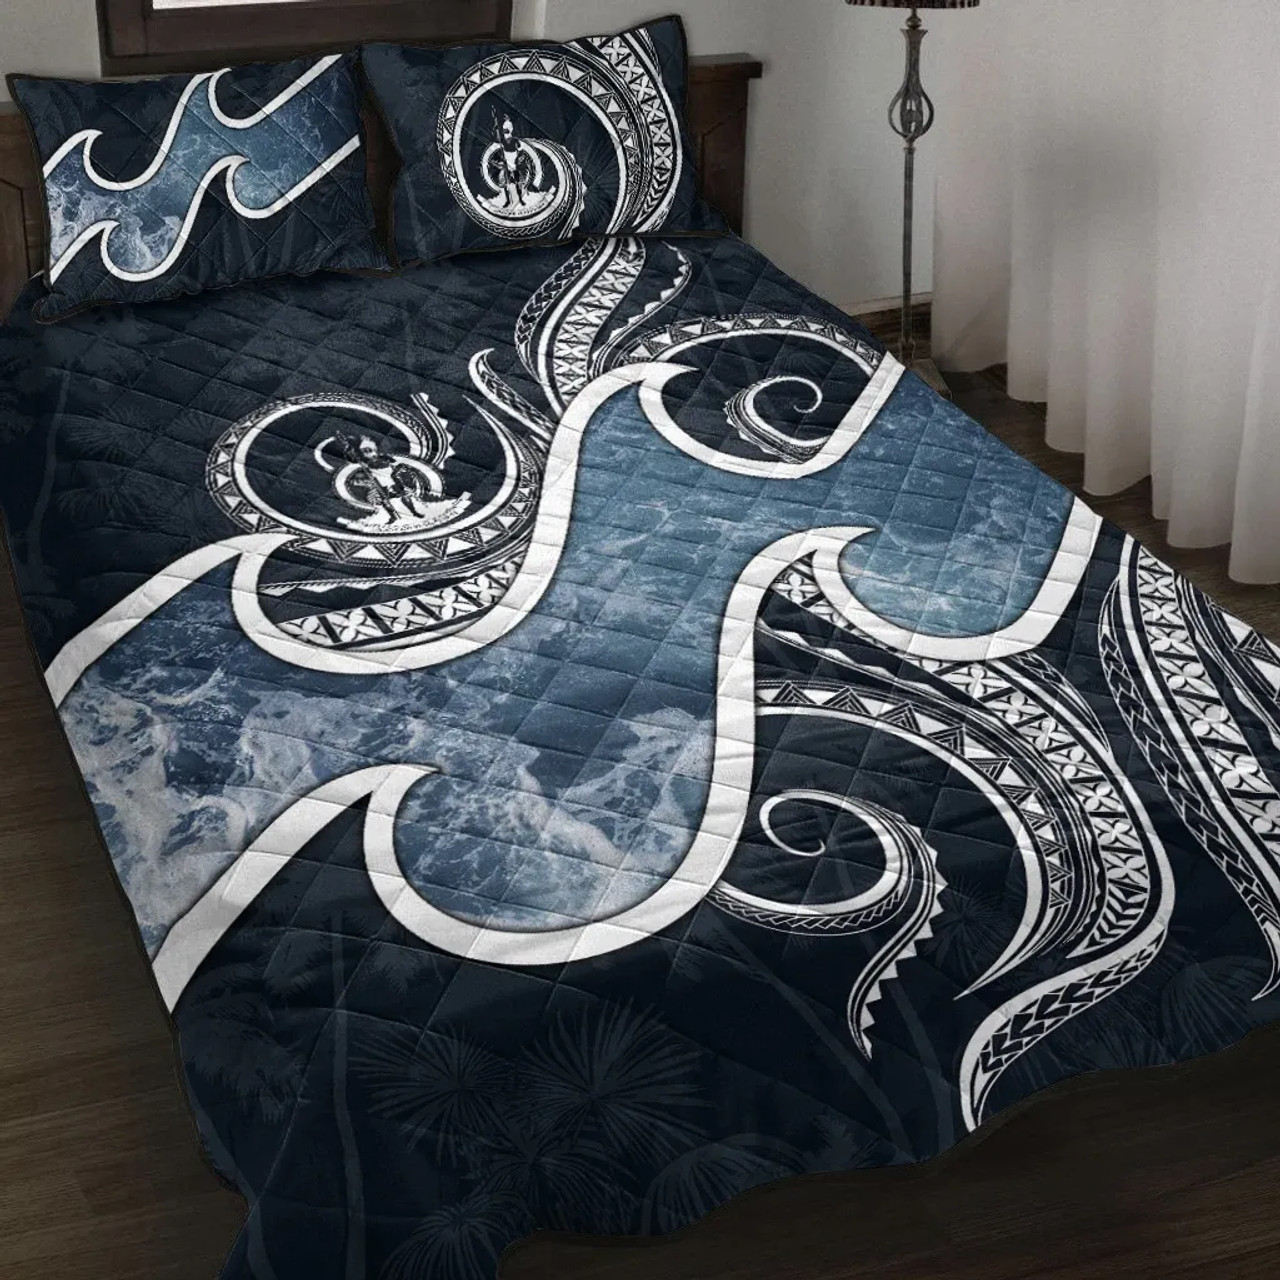 Tuvalu Polynesian Quilt Bed Set - Ocean Style 1